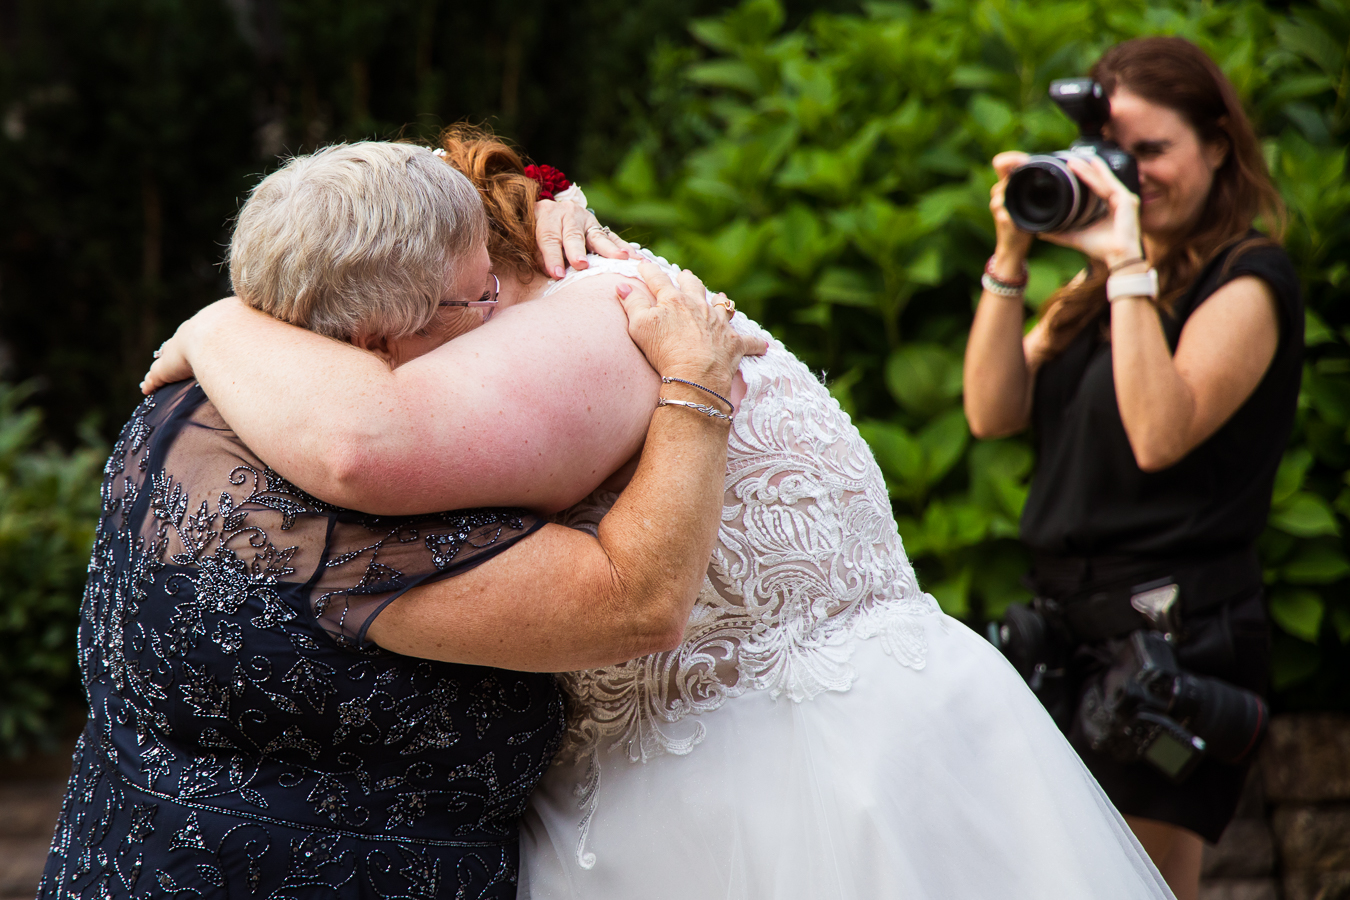 another perspective of the bride and her mom sharing their mother daughter dance together as they hug each other during this emotional moment of the wedding reception 